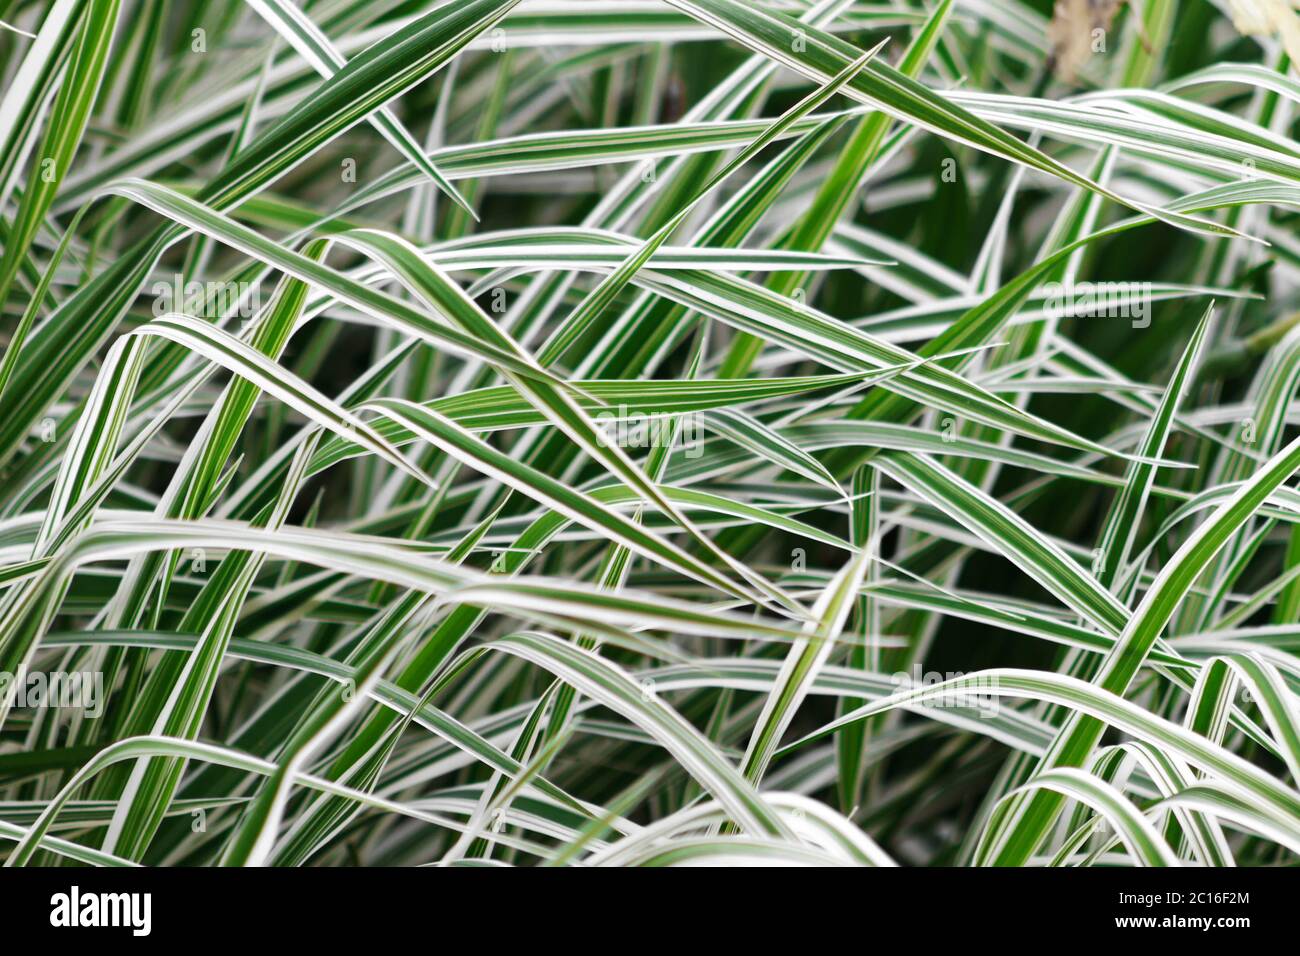 defocused background of Phalaris leaves, striped white and green color grass Stock Photo